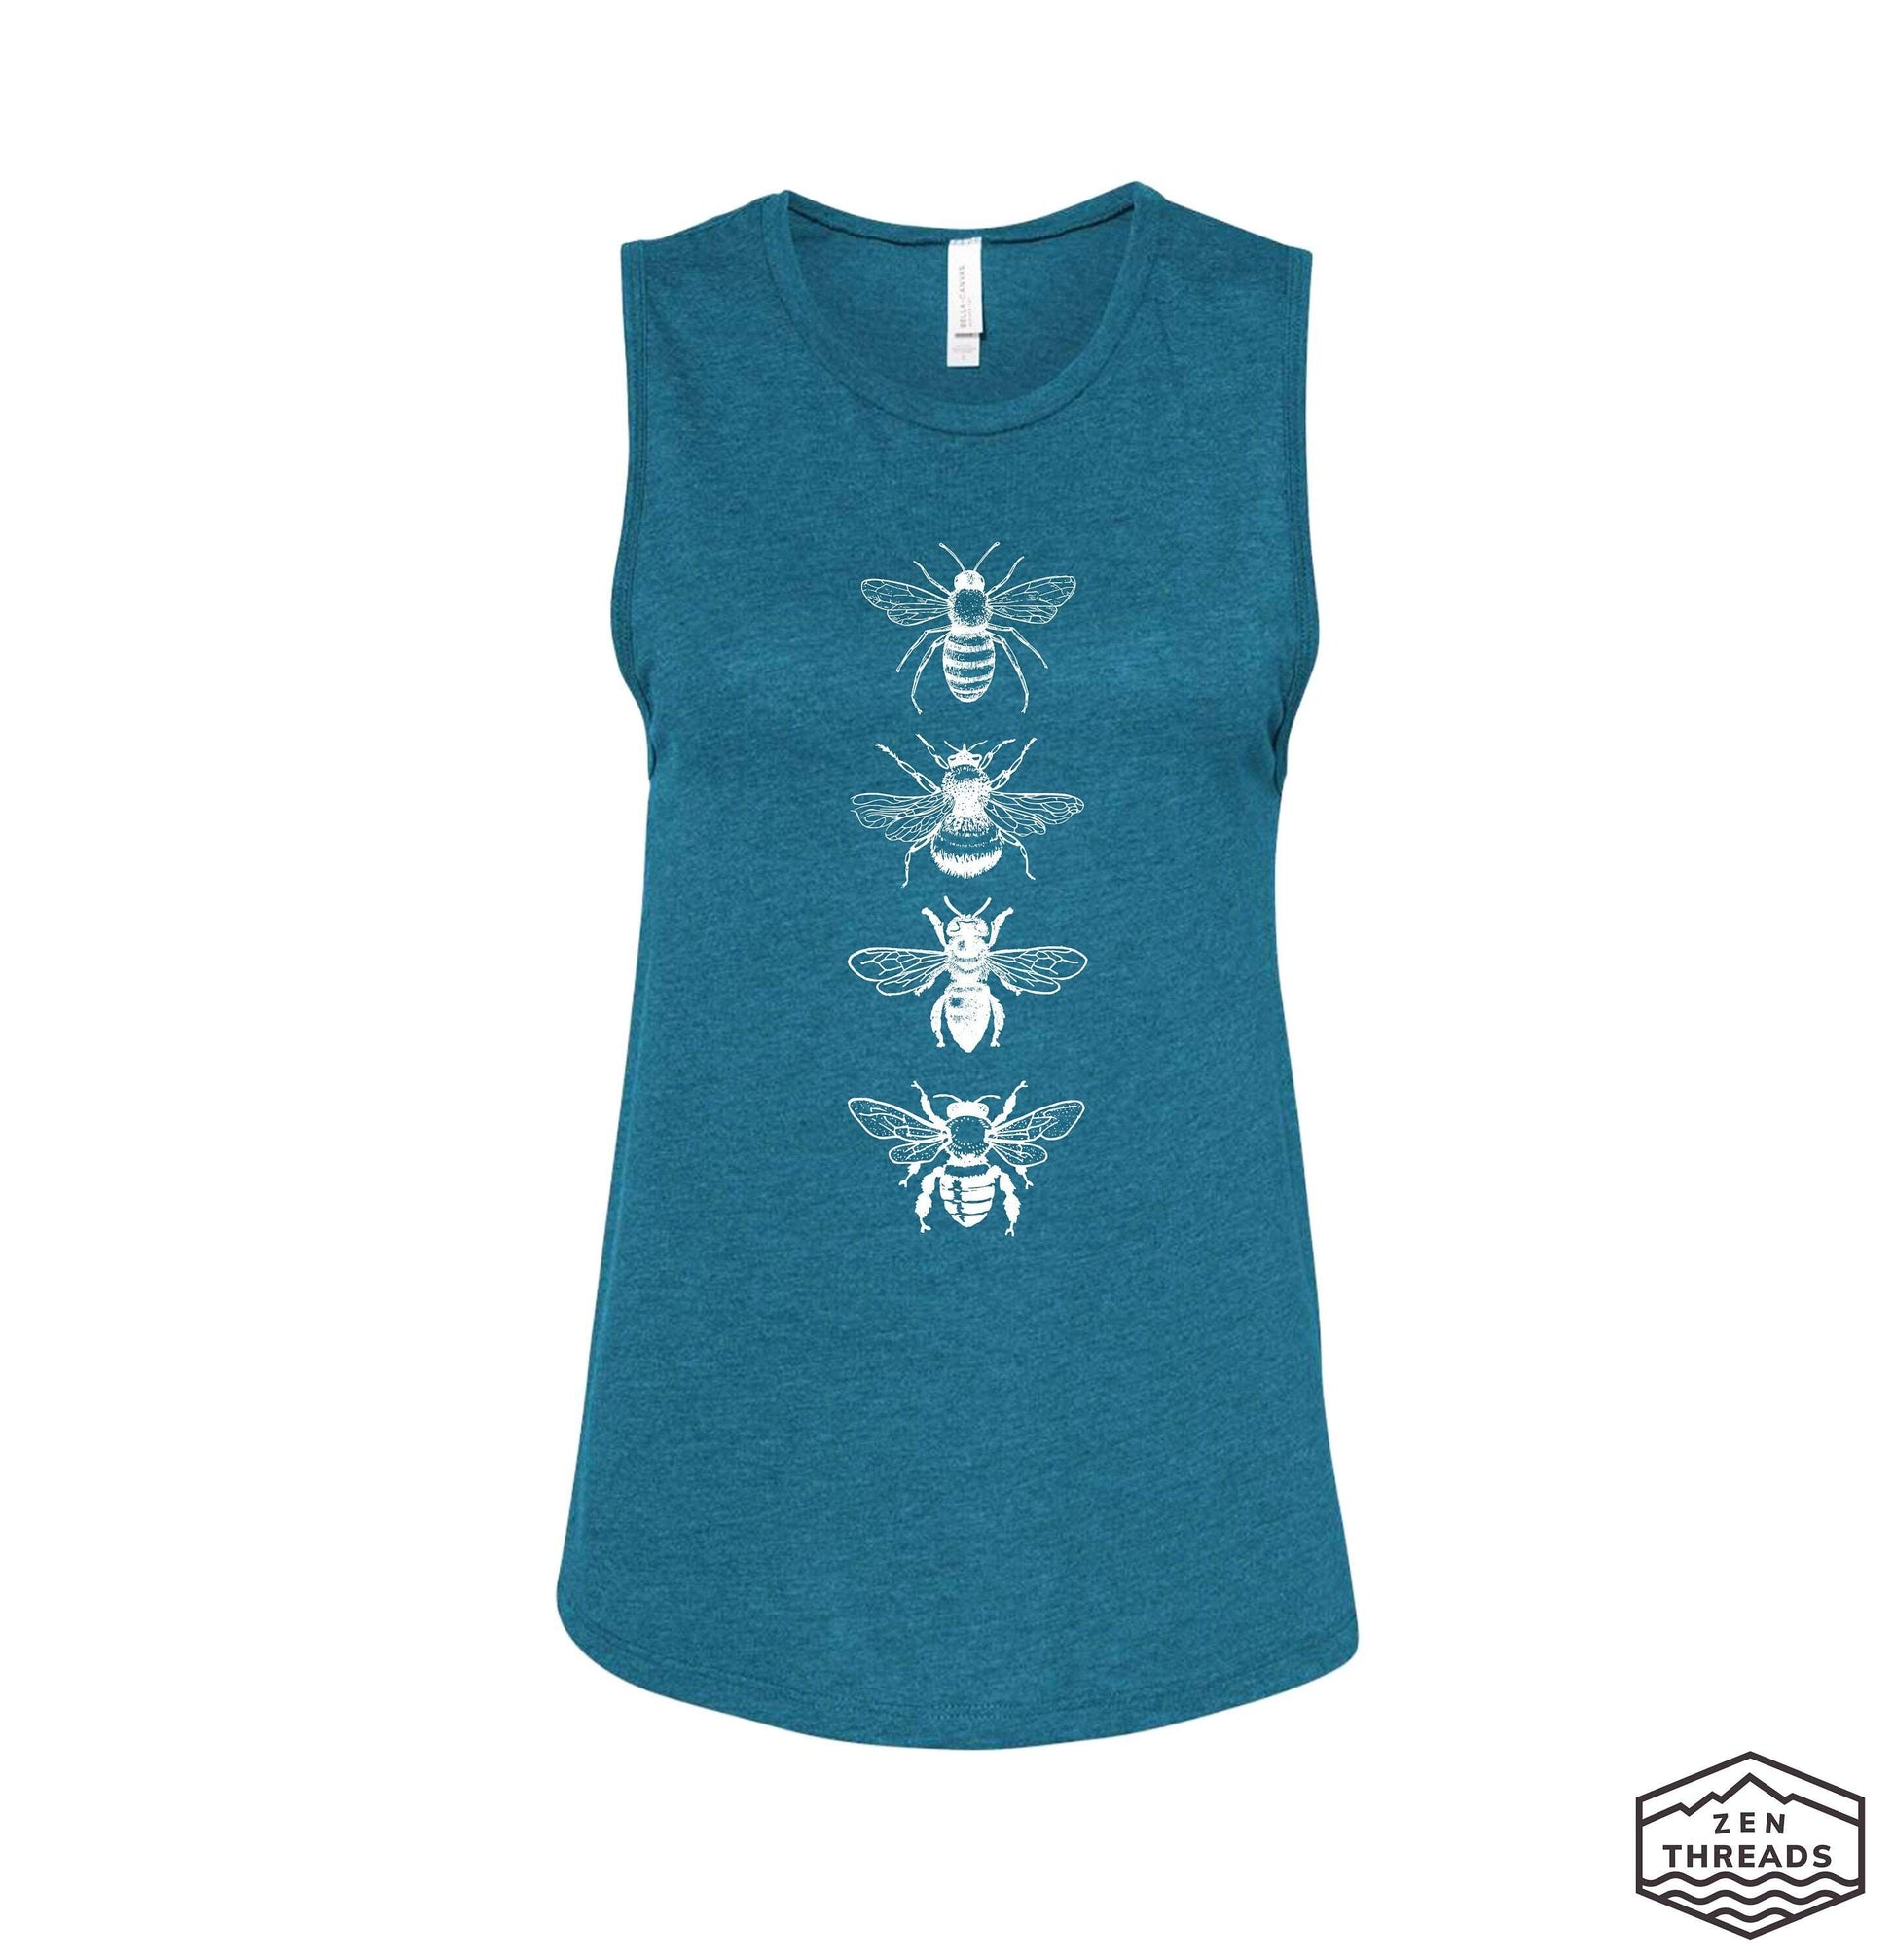 Womens BEES Flowy Muscle Tank workout fitness tee Insect hornet honey Nature Lover beekeeper t-shirt